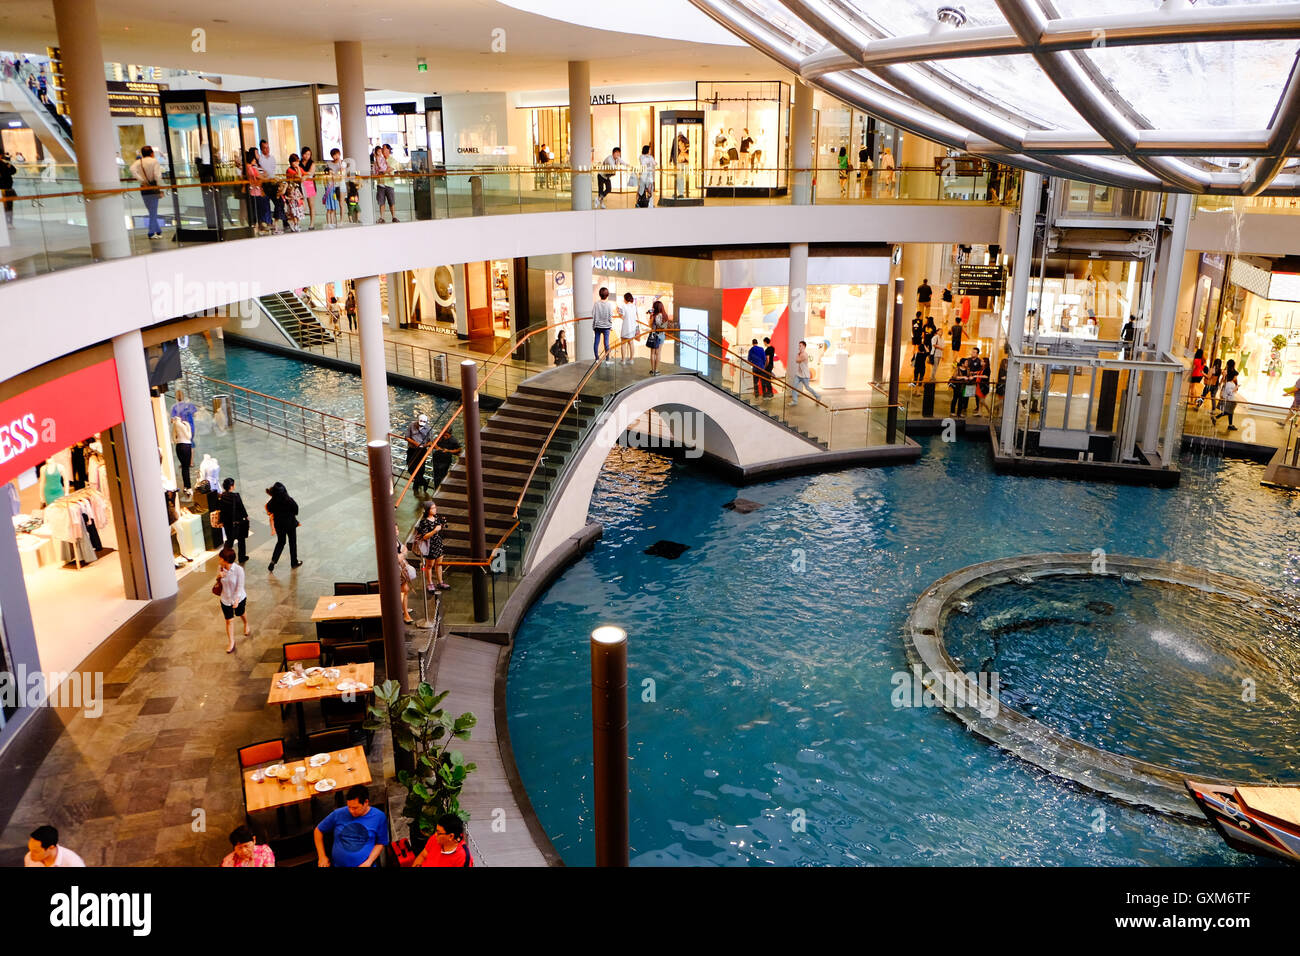 Interior with canal in the Maria bay Sands shopping centre Singapore Stock Photo